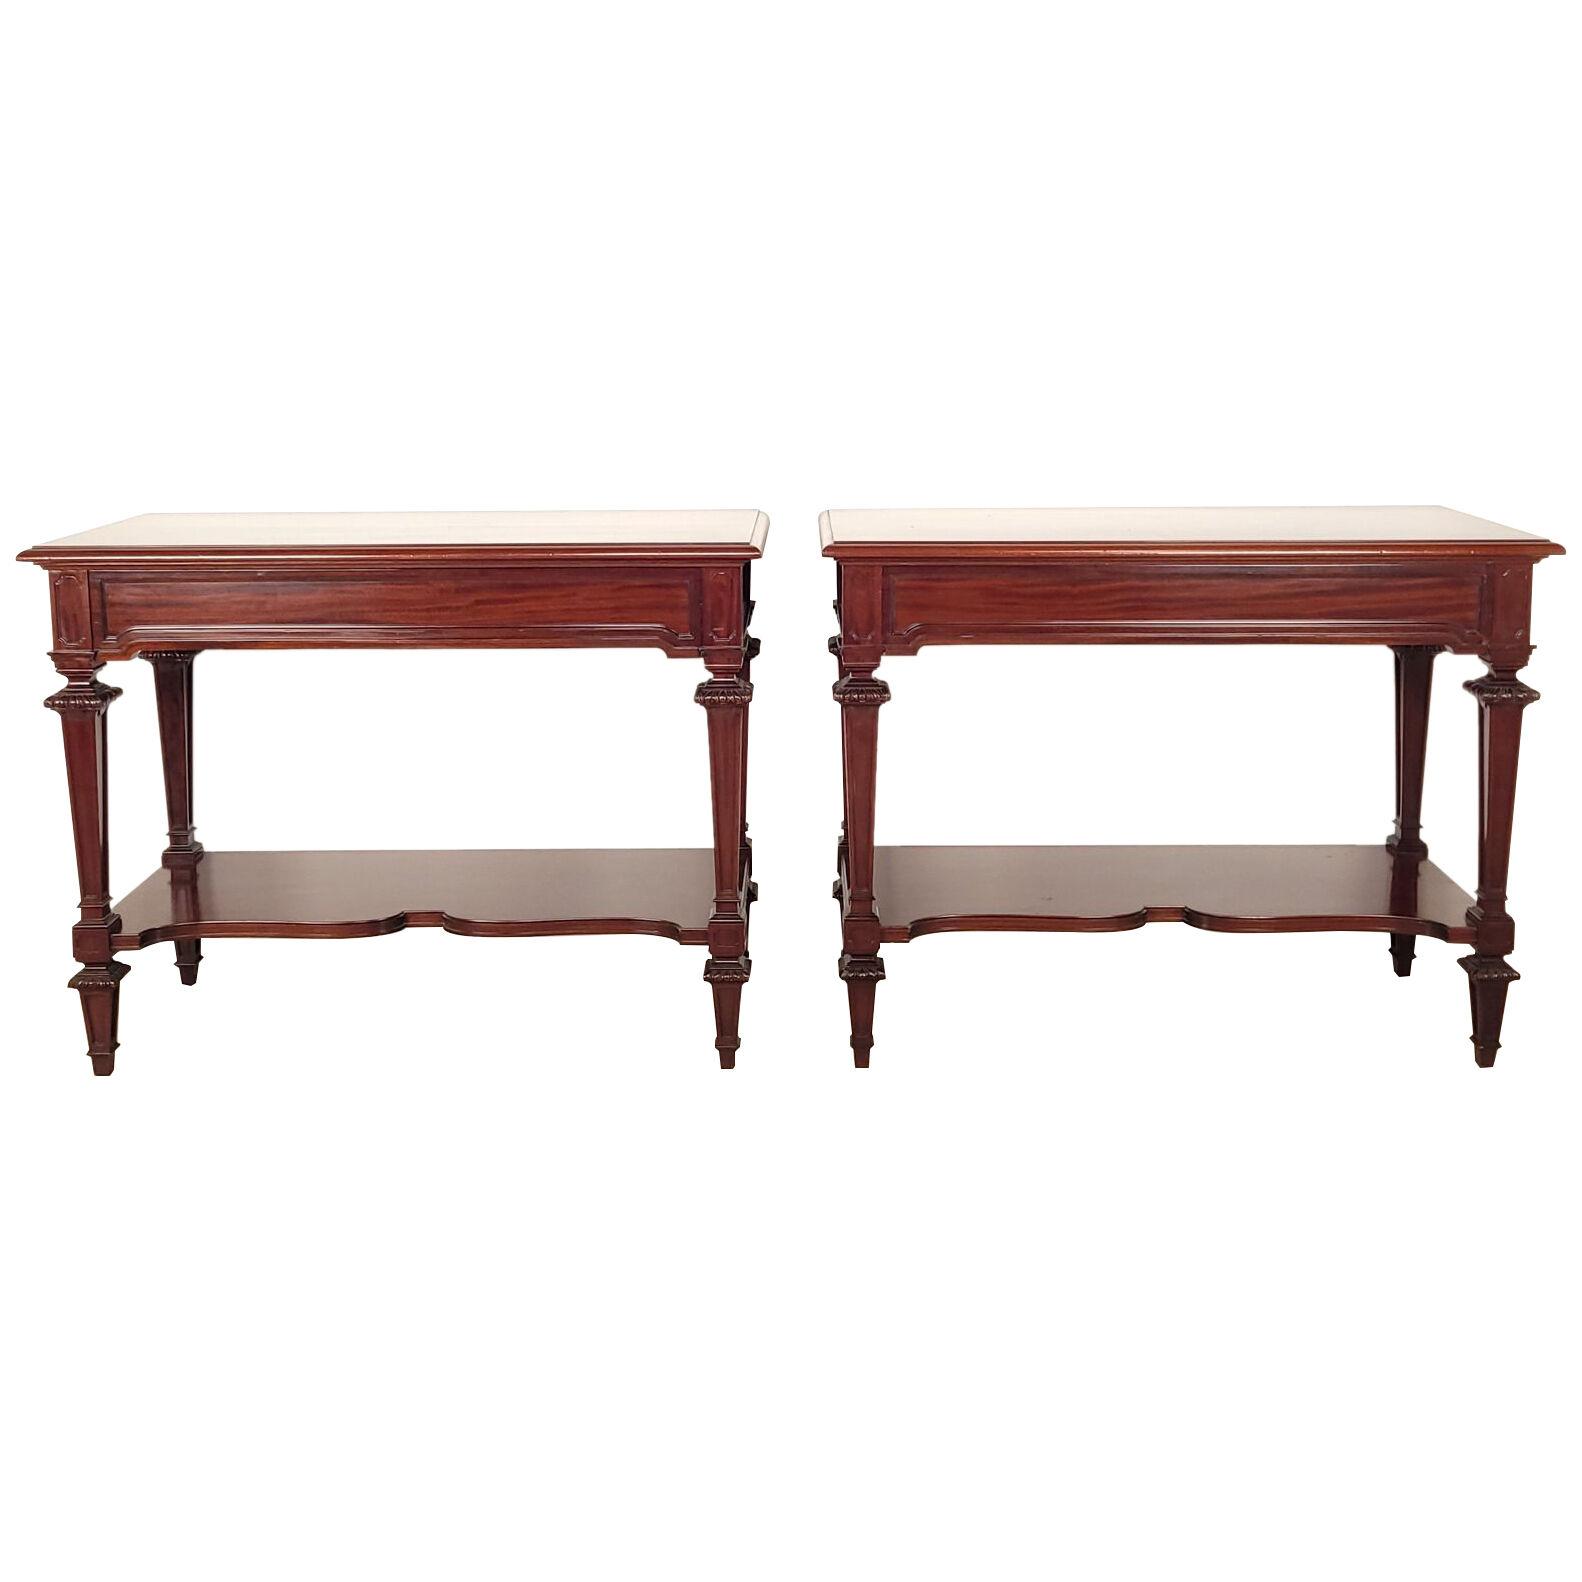 Pair of Victorian Mahogany Consoles or Servers in the French Taste, England circ